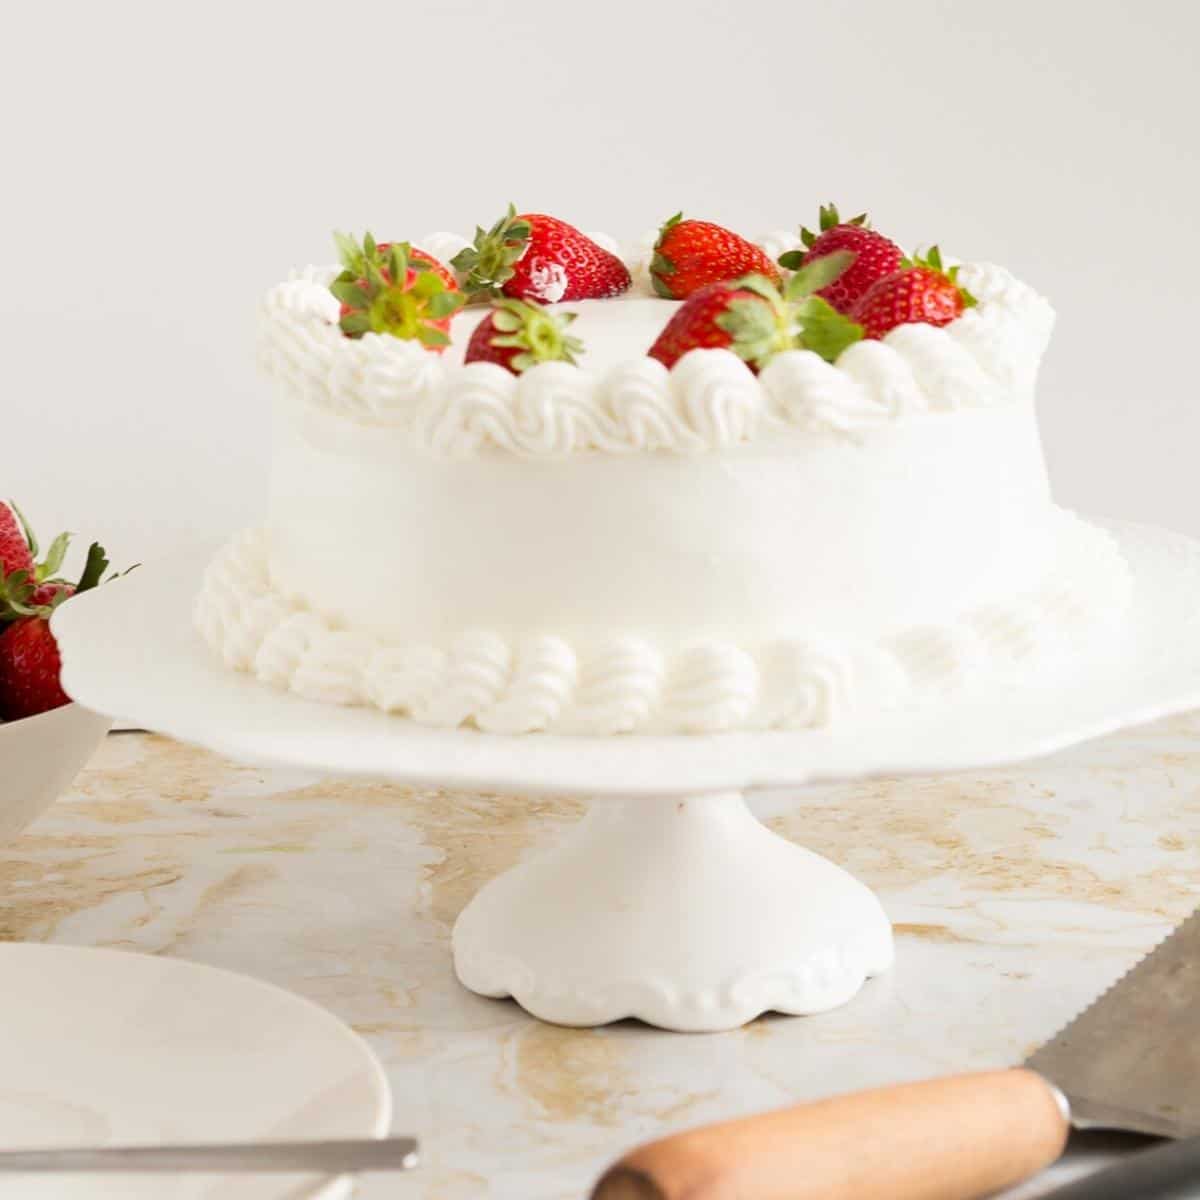 A whipped cream frosted genoise cake.